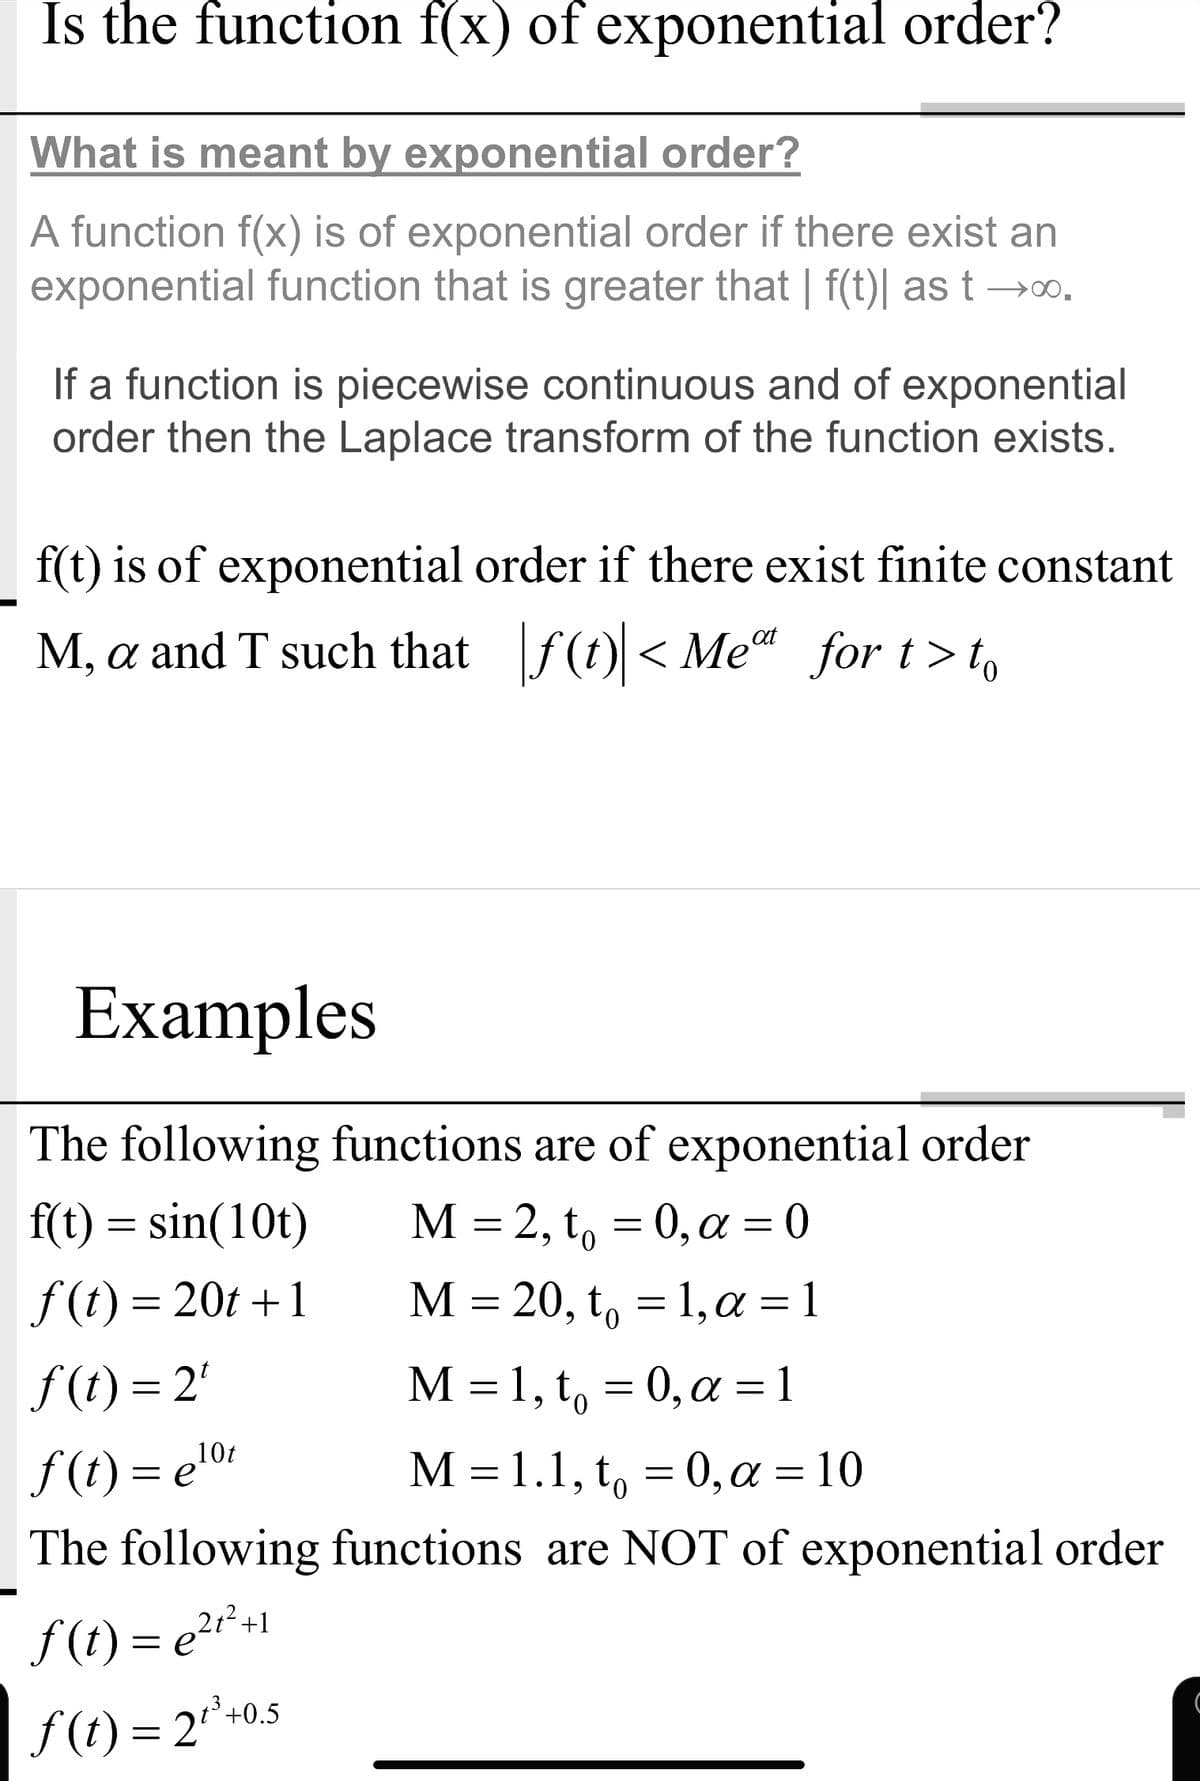 Is the function f(x) of exponential order?
X
What is meant by exponential order?
A function f(x) is of exponential order if there exist an
exponential function that is greater that | f(t)| as t →o.
If a function is piecewise continuous and of exponential
order then the Laplace transform of the function exists.
f(t) is of exponential order if there exist finite constant
M, a and T such that f(t) < Me“ for t>t,
Examples
The following functions are of exponential order
f(t) = sin(10t)
М —
M = 2, t, = 0, a = 0
f (t) = 20t +1
M = 20, t, = 1,a = 1
f (t) = 2'
f (t) = e'01
The following functions are NOT of exponential order
M =1, t, = 0,a =1
M- 1.1, t, 0,α -10
10t
f (t) = e?r*+1
f (t) = 2*+0.
3+0.5
